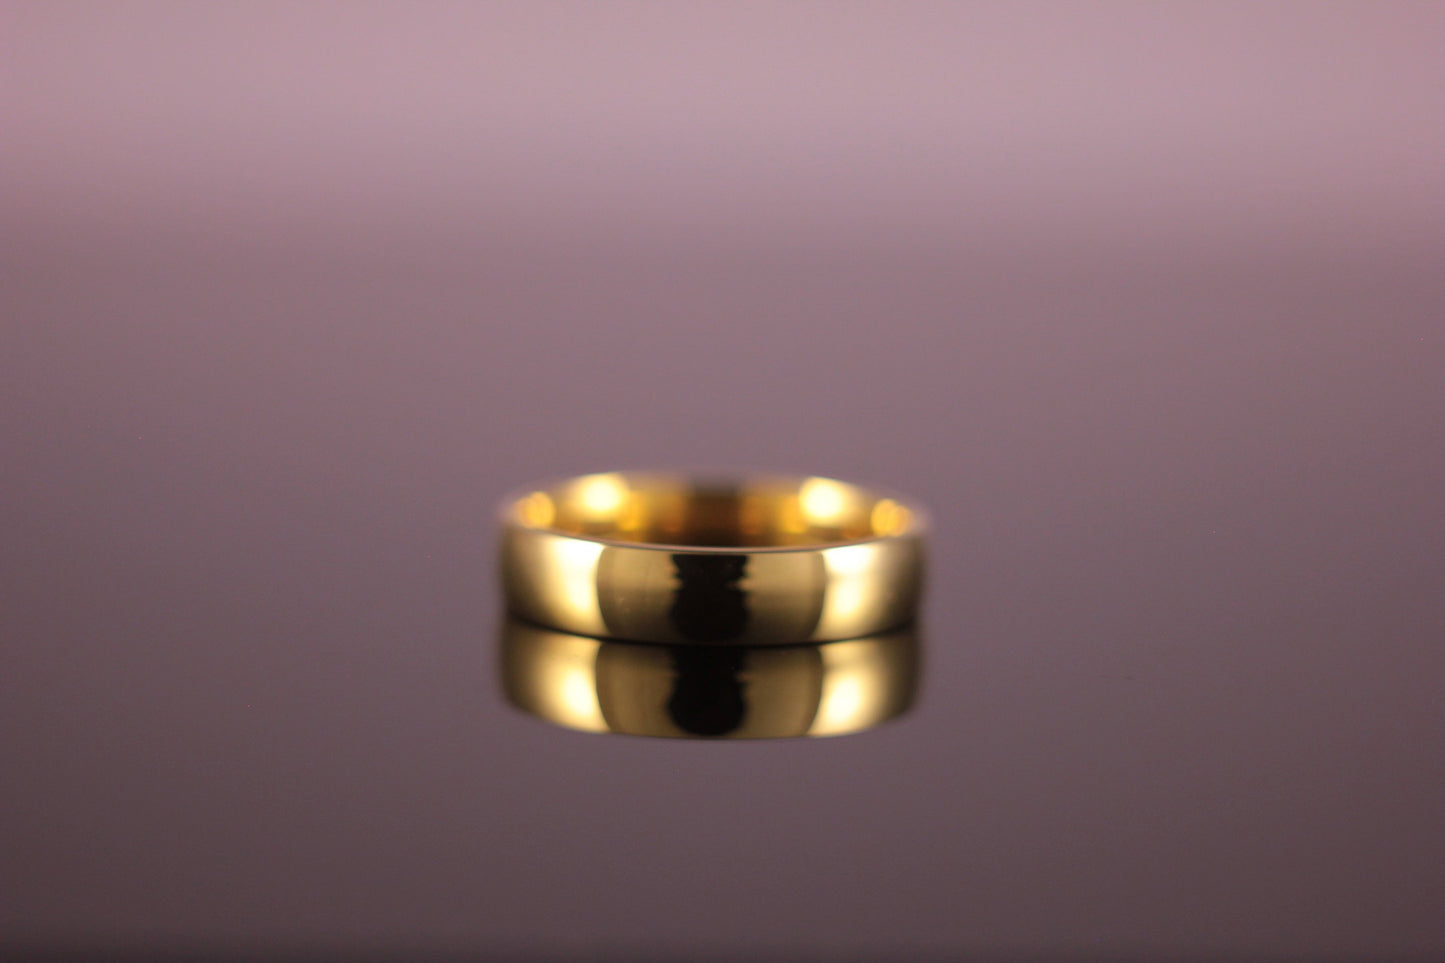 5mm 'D' Profile Wedding Band in 18ct Yellow Gold